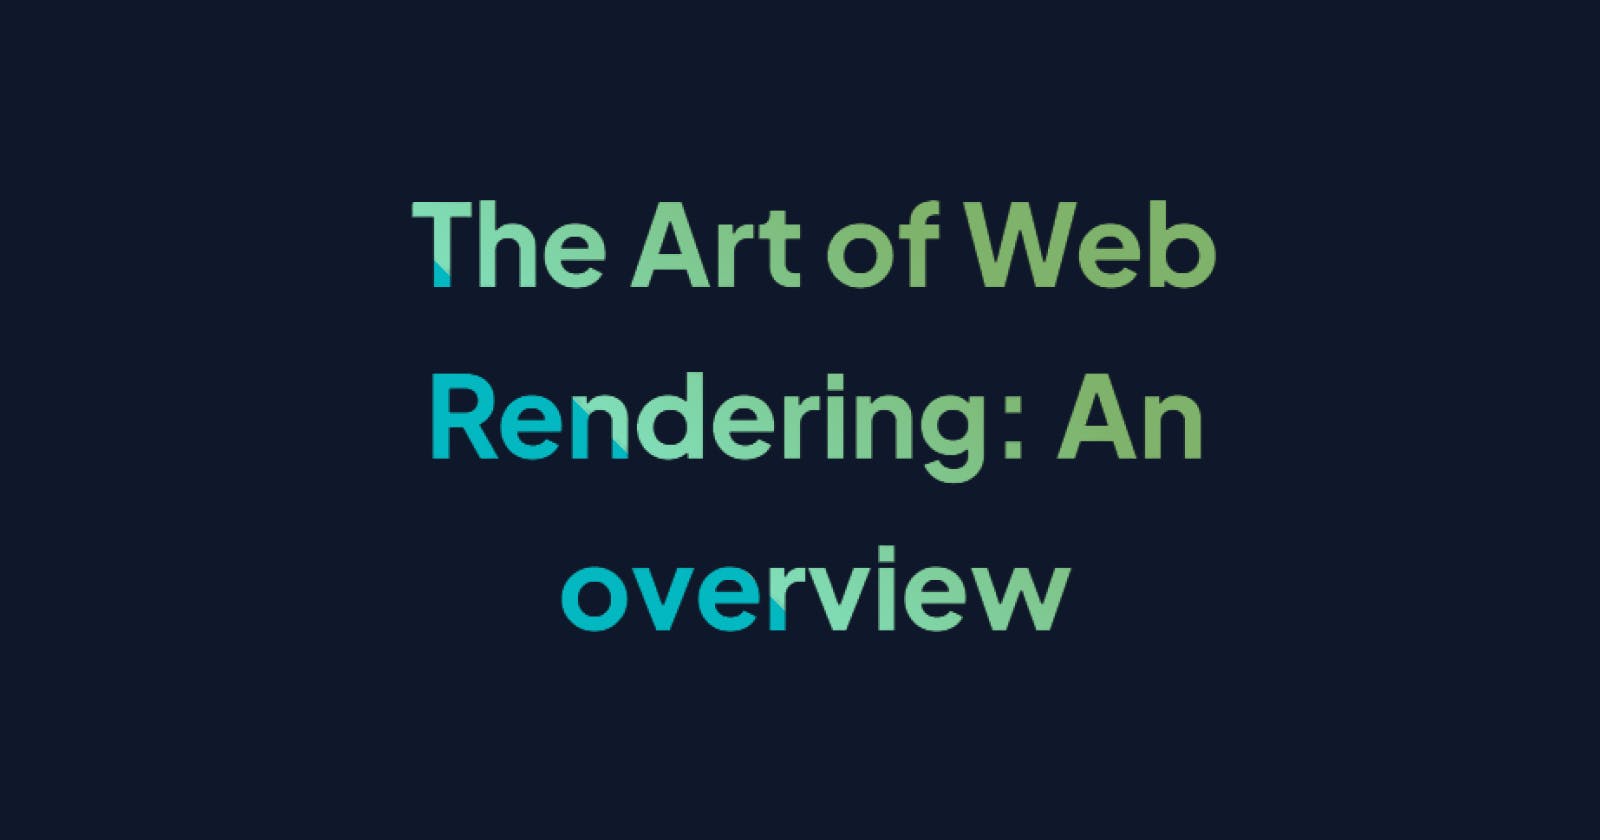 The Art of Web Rendering: An overview